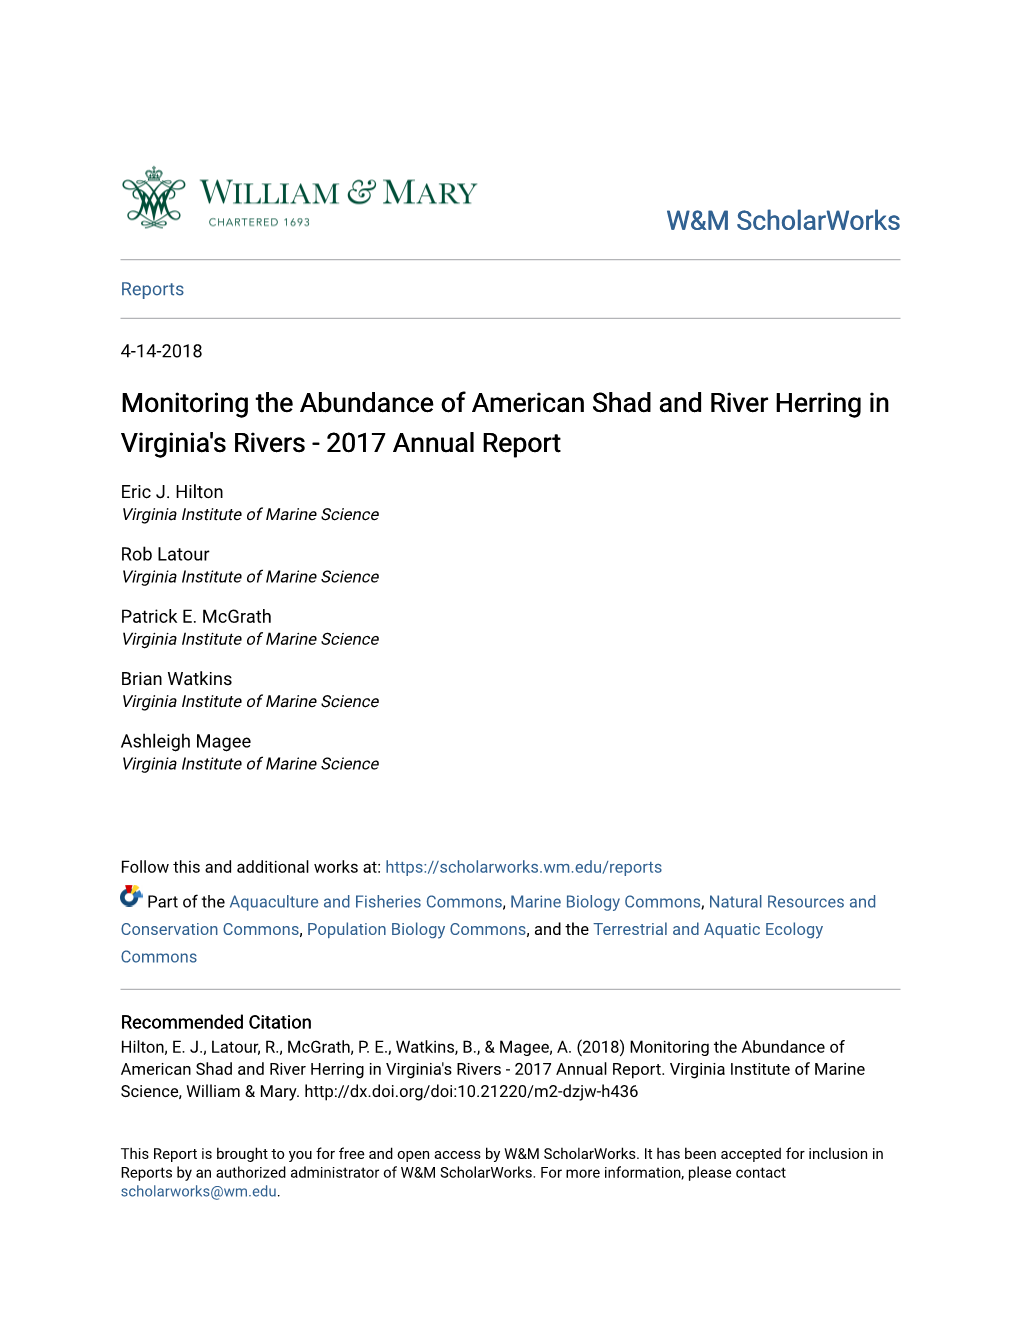 Monitoring the Abundance of American Shad and River Herring in Virginia's Rivers - 2017 Annual Report